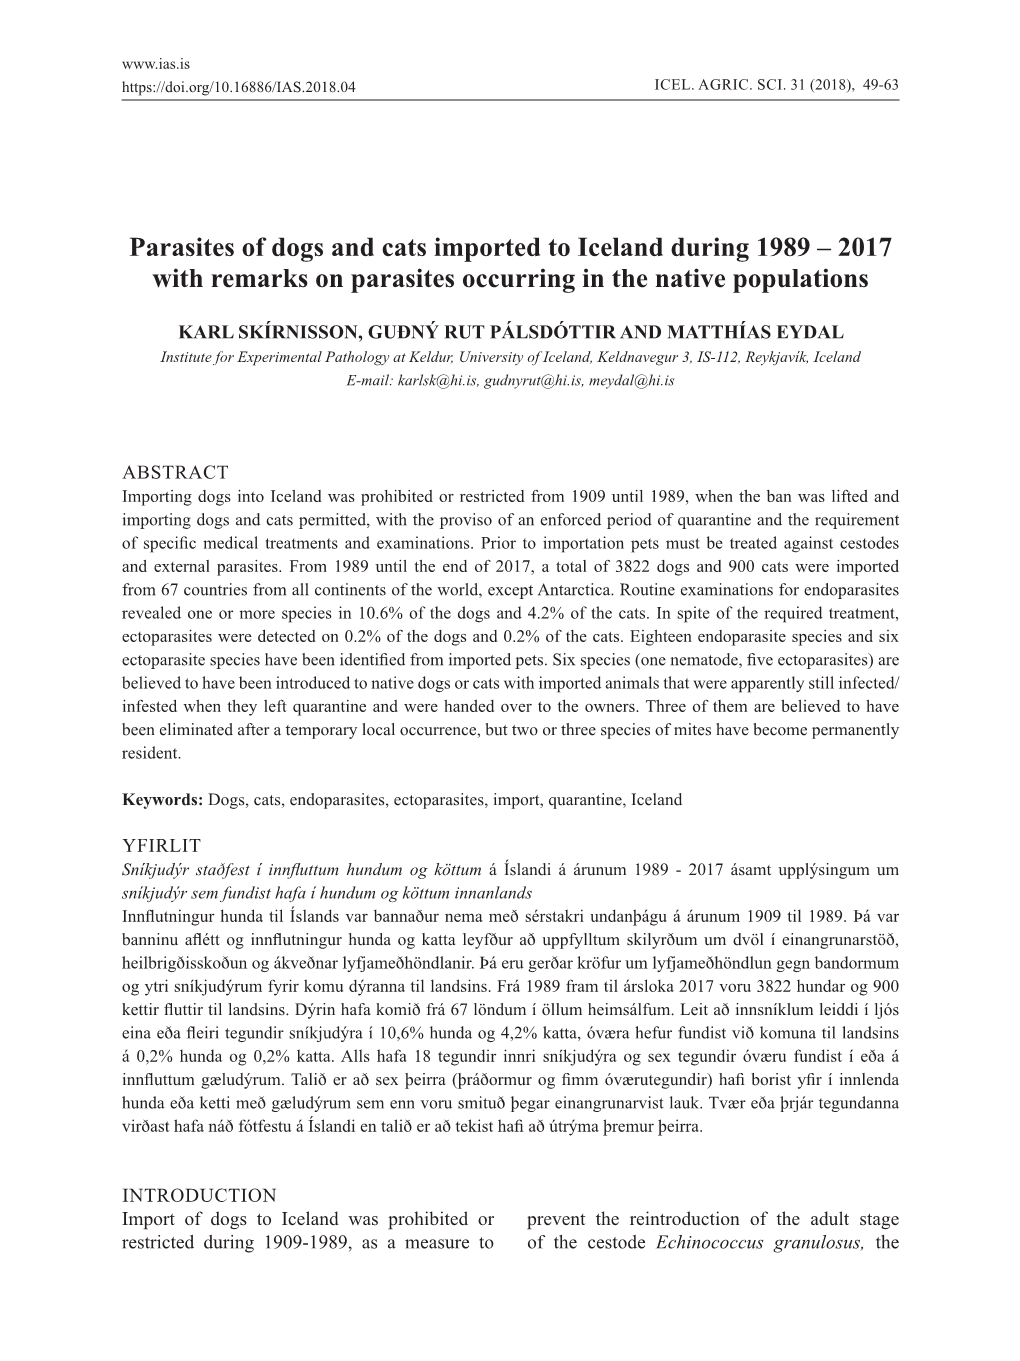 Parasites of Dogs and Cats Imported to Iceland During 1989 – 2017 with Remarks on Parasites Occurring in the Native Populations